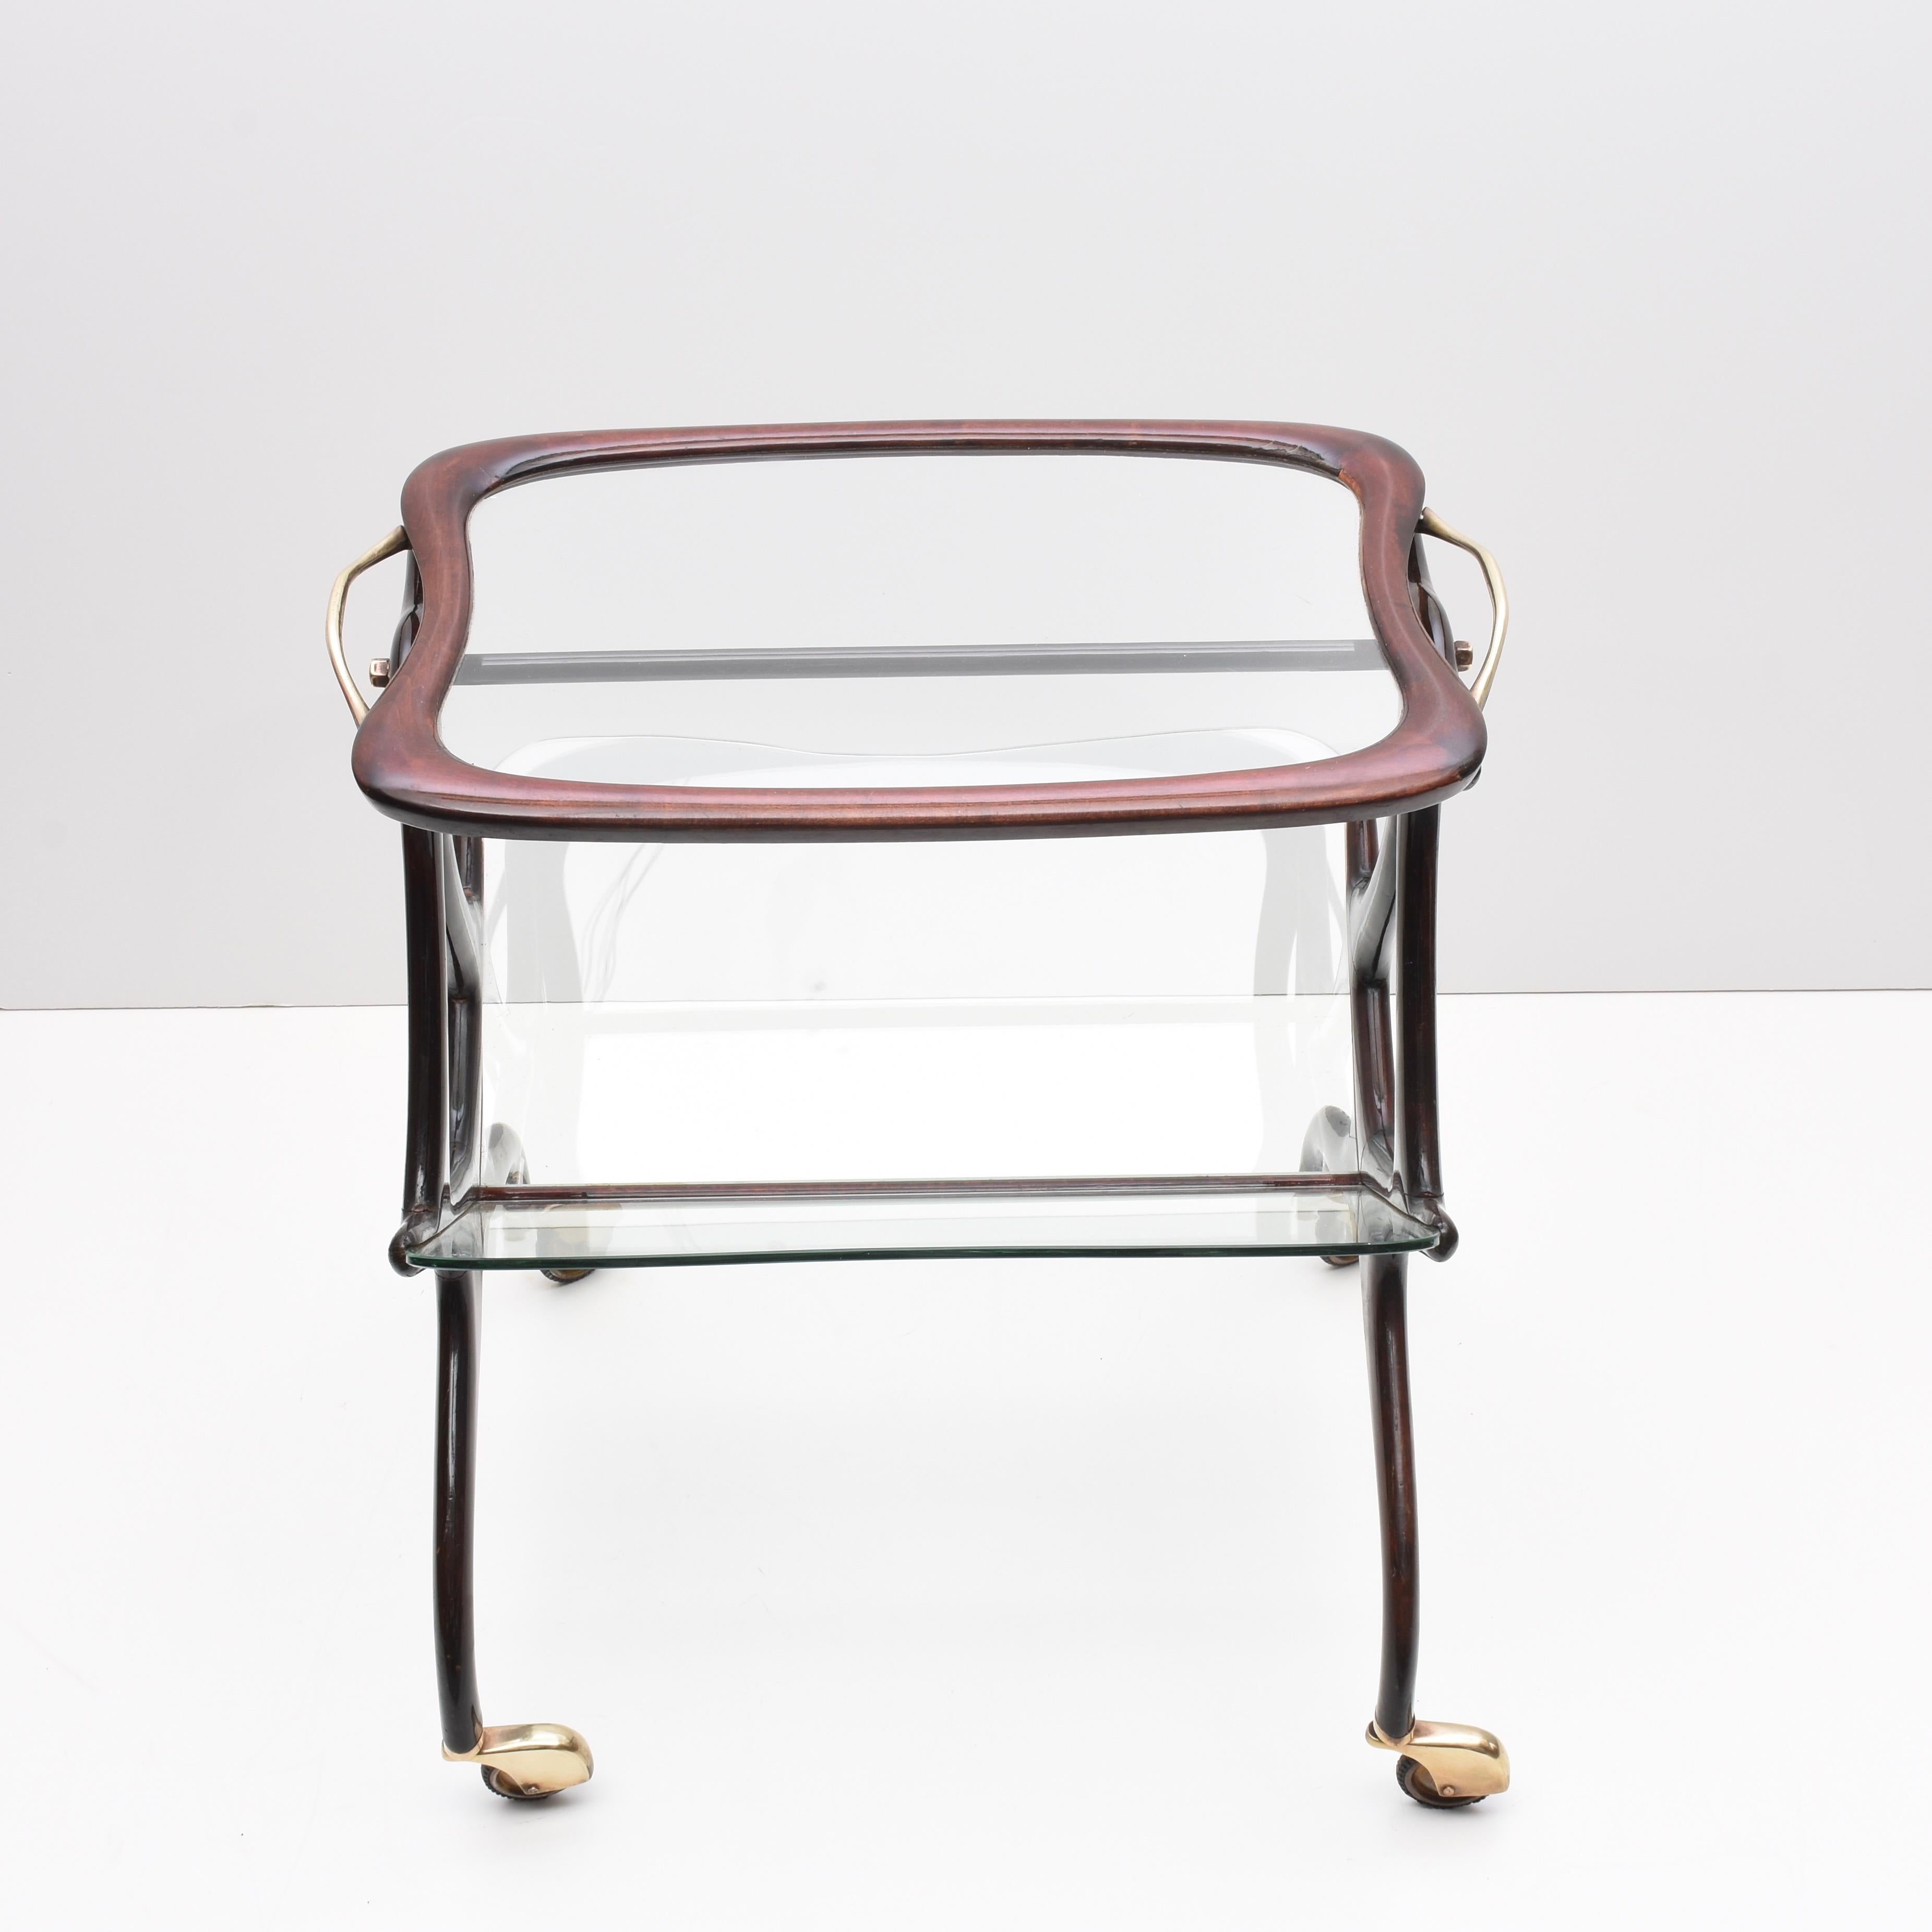 Amazing Mid-Century Modern wood magazine rack and bar cart. This wonderful piece was designed in Italy during 1950s by Cesare Lacca.

This item is in a magnificent vintage condition, it is made of glass tray and wood designed in sinuous and elegant